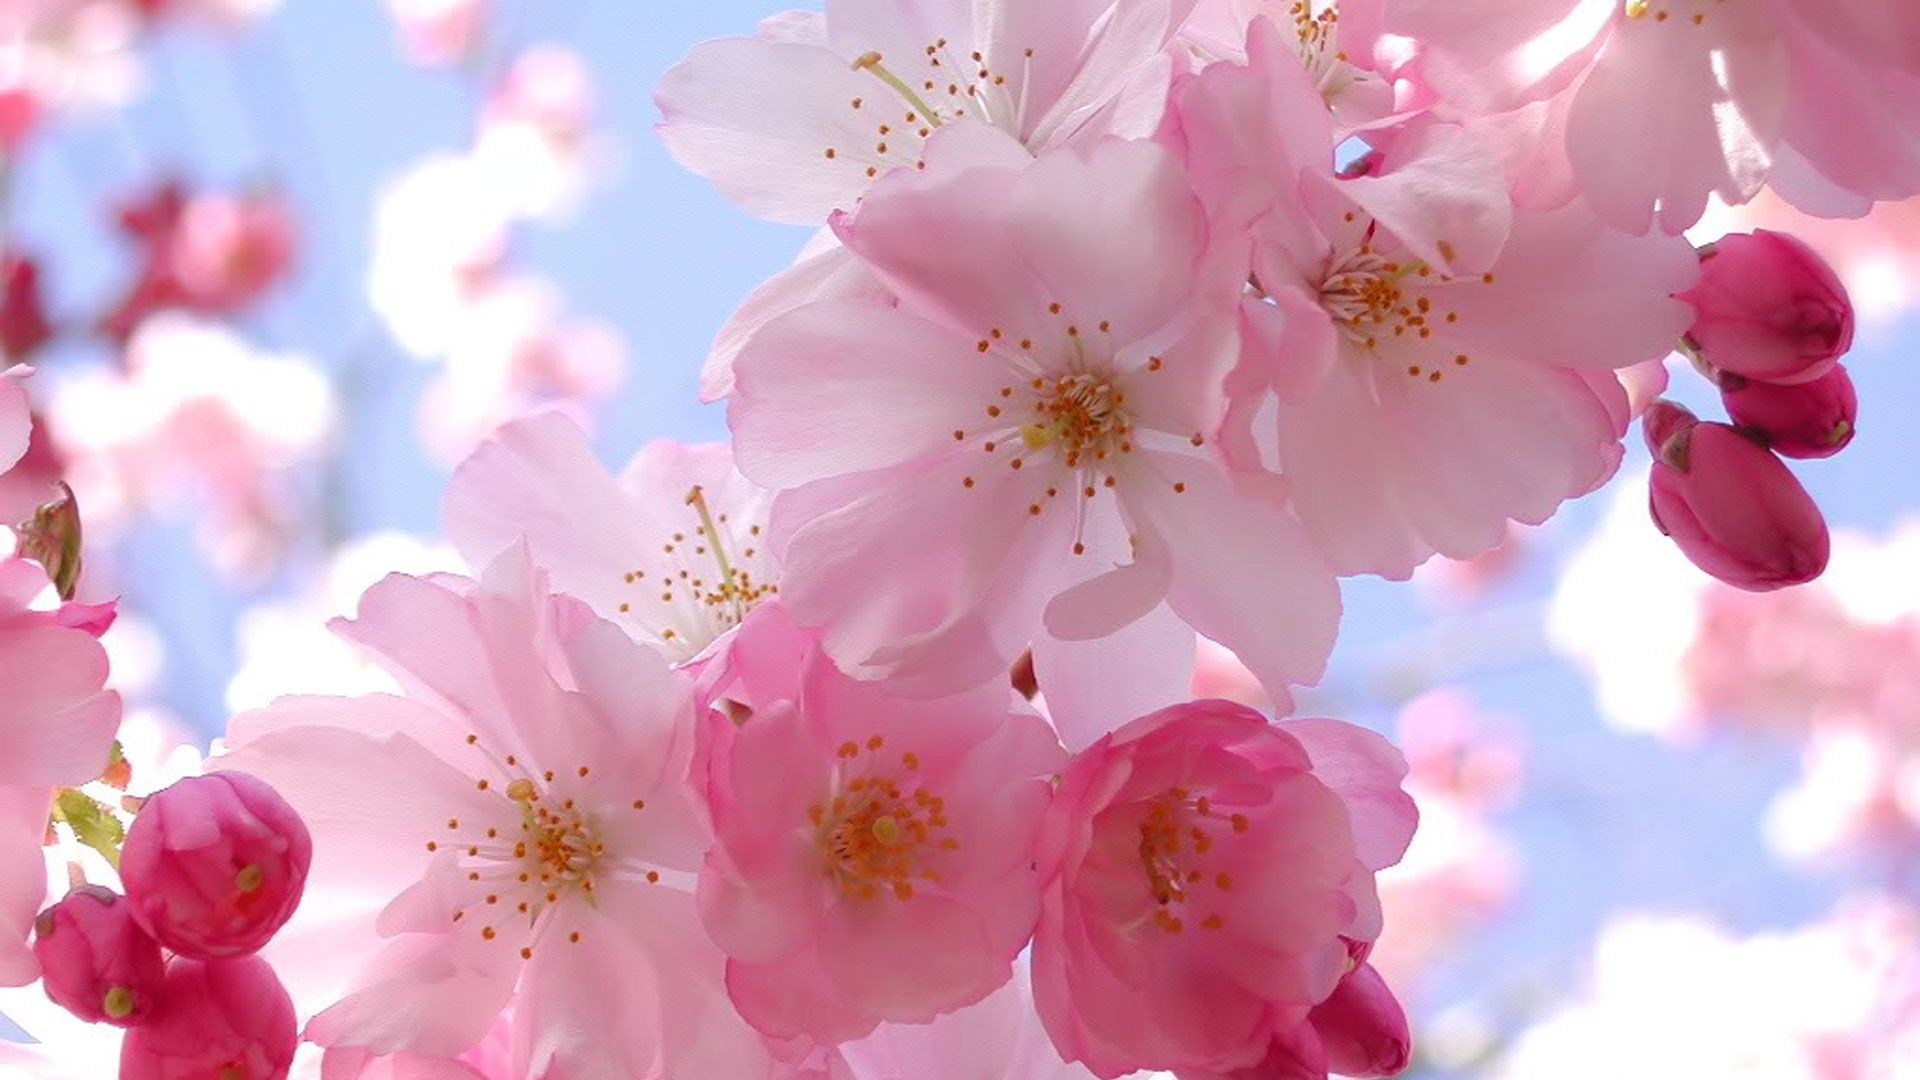 Blooming Pink Cherry Blossom - Japanese Cherry Blossom Hd - HD Wallpaper 